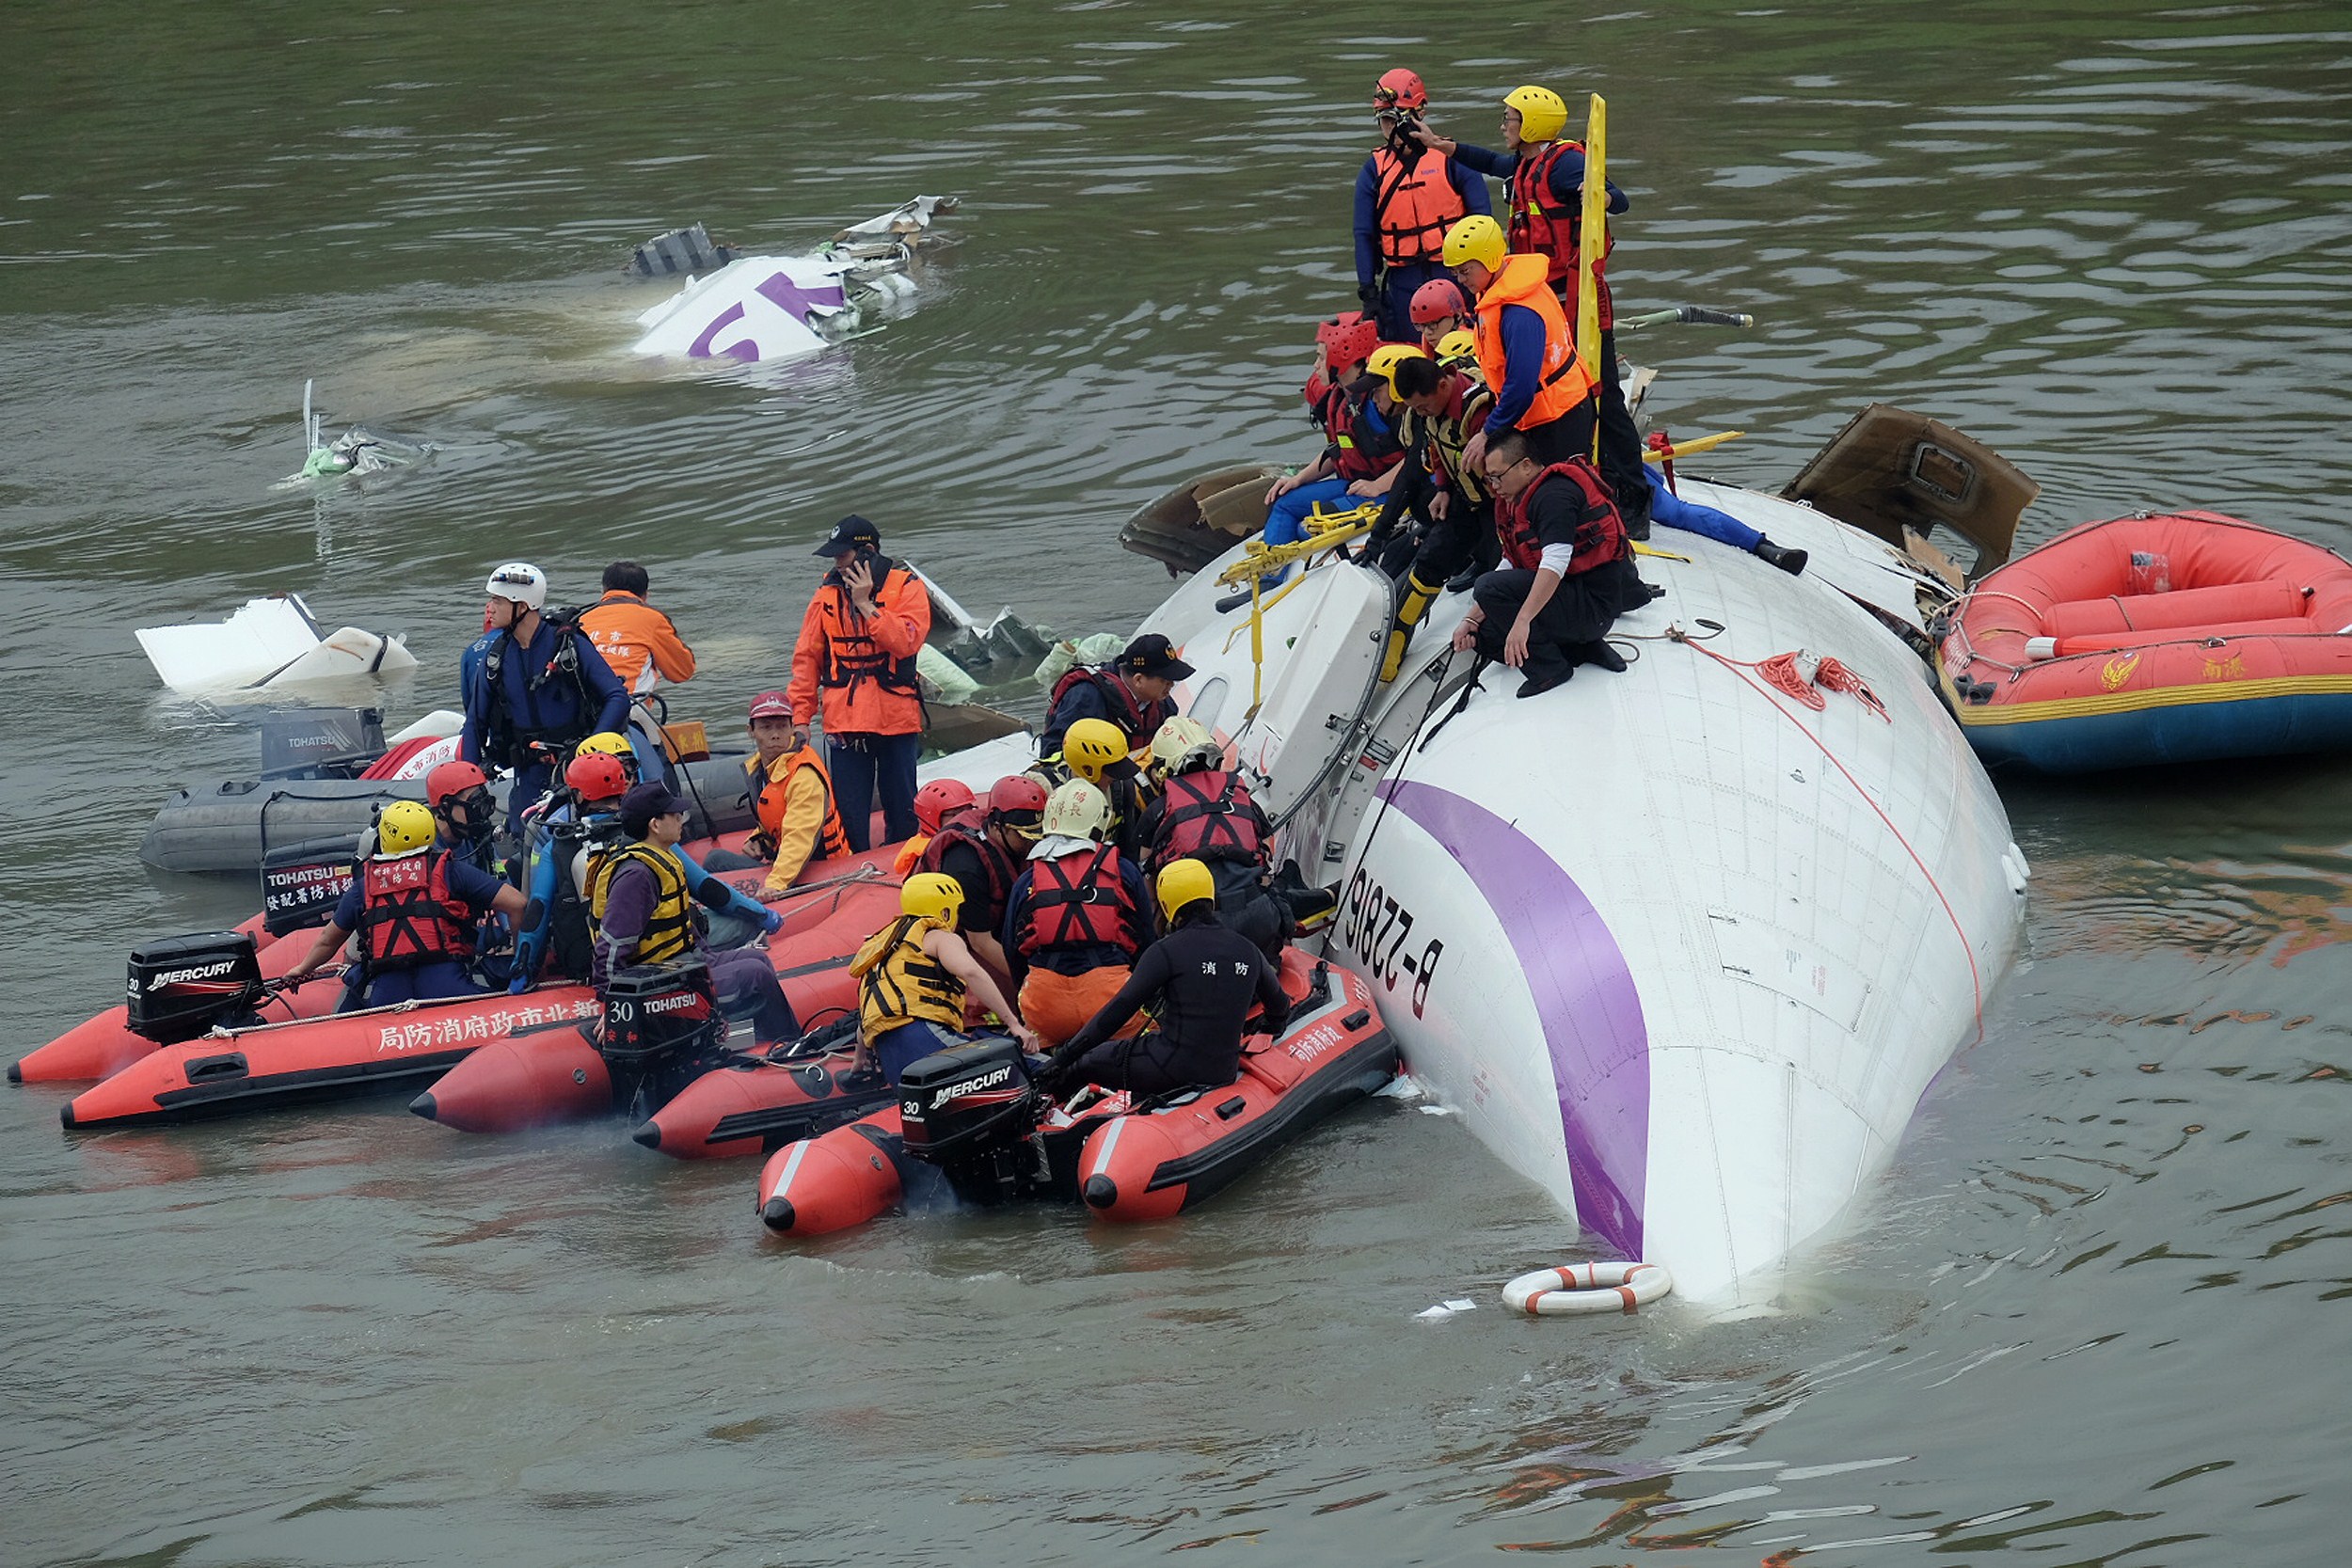 PHOTO: Rescue personnel work to free passengers from a TransAsia ATR 72-600 turboprop plane that crash-landed into a river outside Taiwan's capital Taipei in New Taipei City, February 4, 2015.